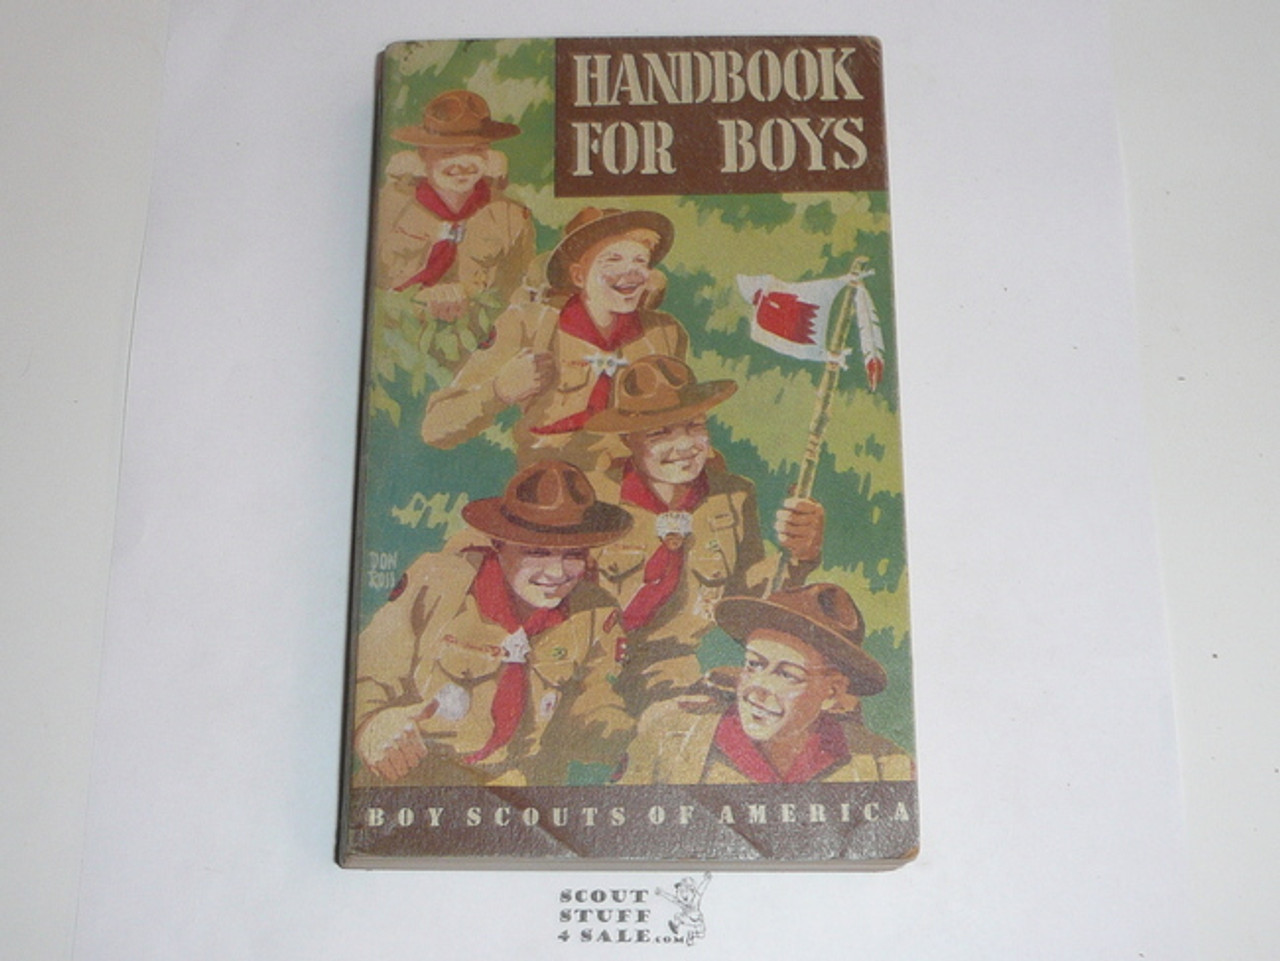 1949 Boy Scout Handbook, Fifth Edition, Second Printing, Don Ross Cover Artwork, Lite wear, three stars on last page